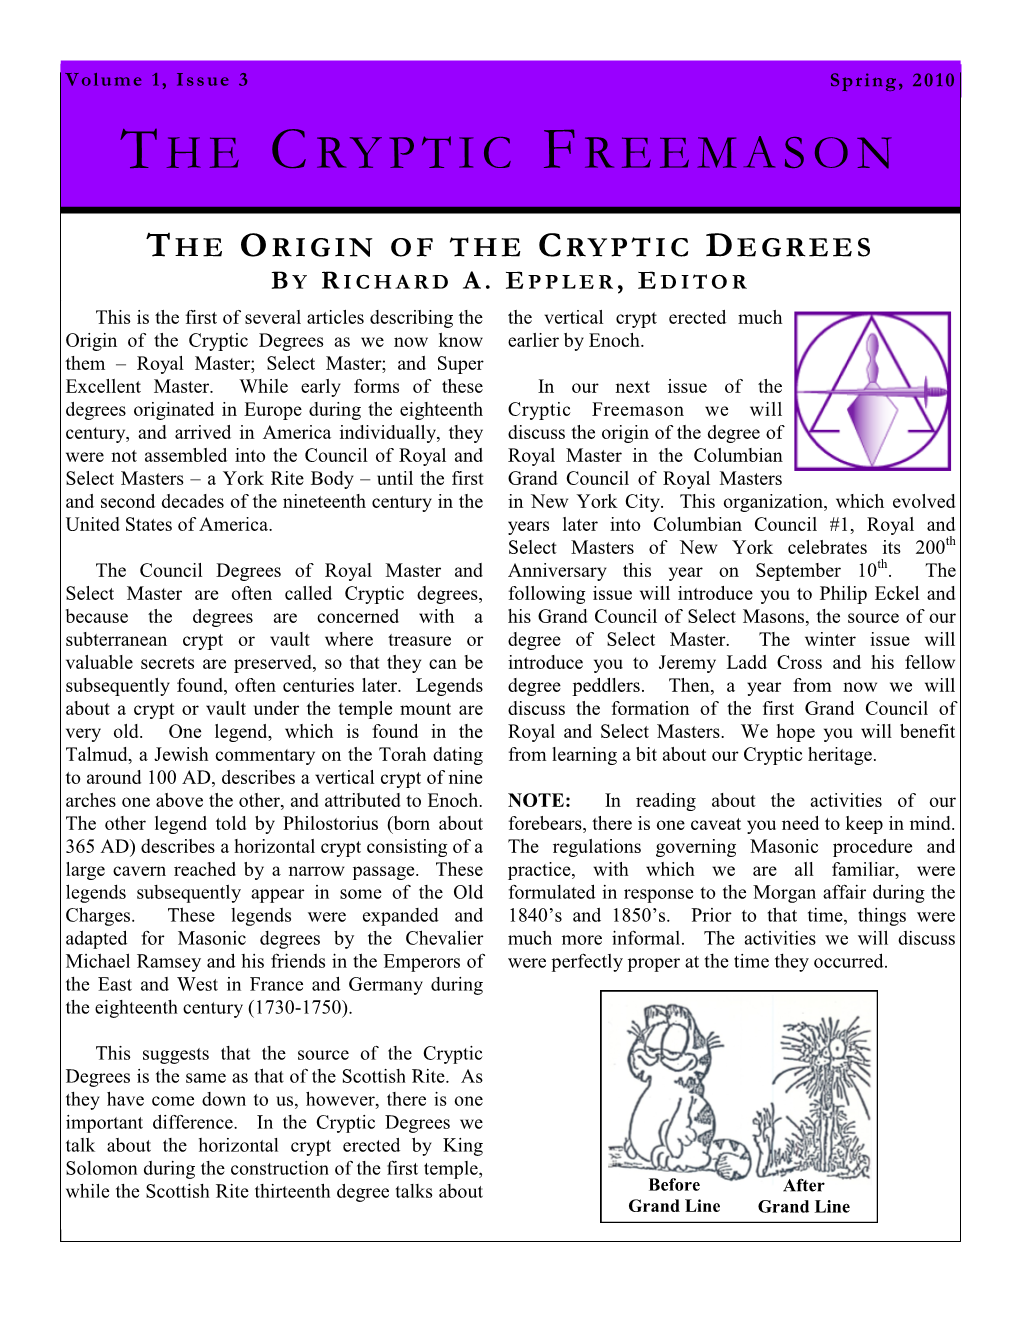 The Cryptic Freemason Page 3 from the DESK of the EDITOR B Y R ICHARD A